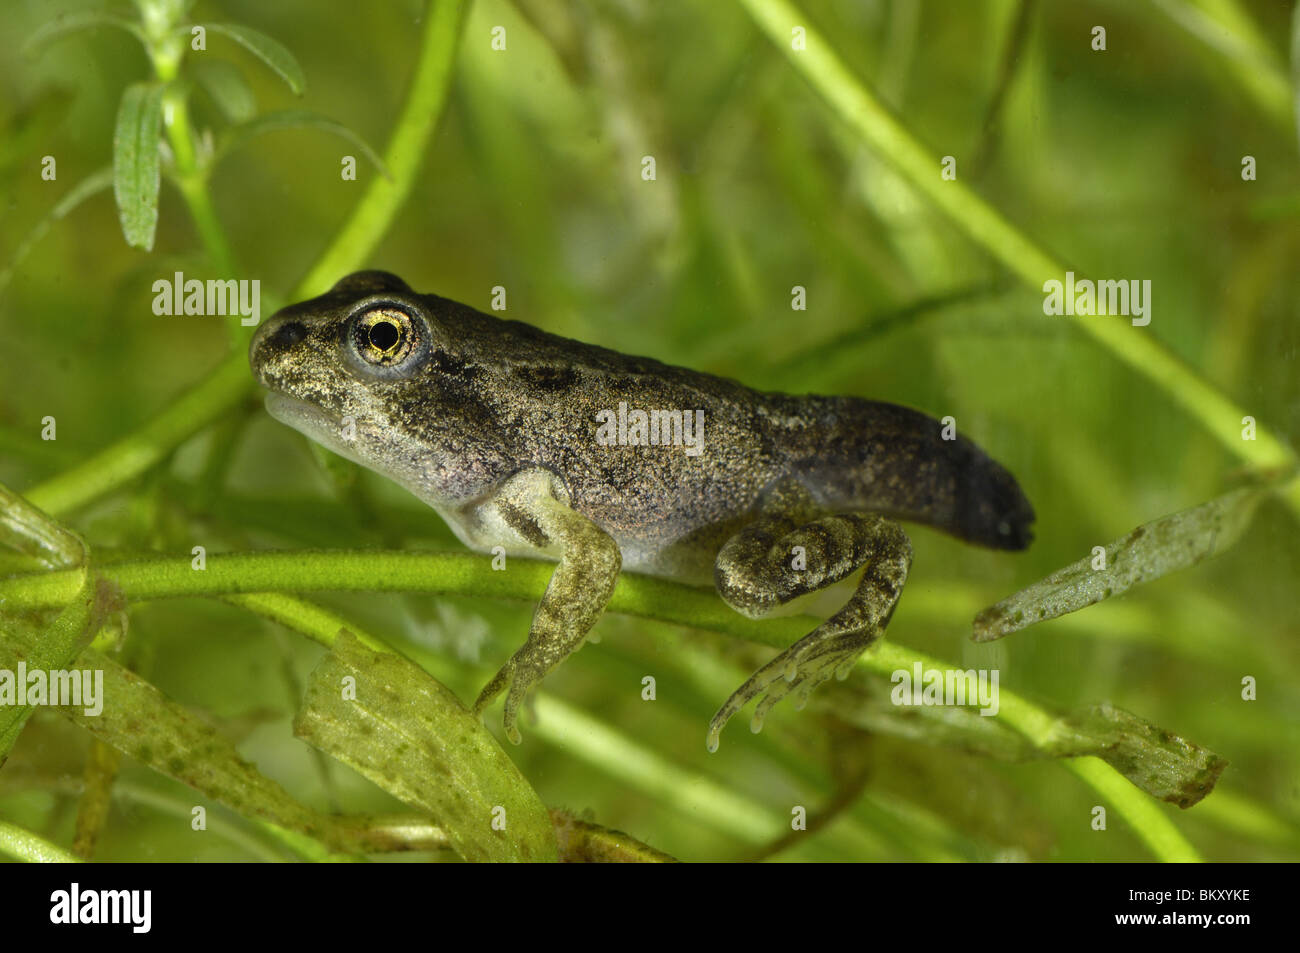 Tadpole with 4 legs & tail swimming in a puddle Stock Photo